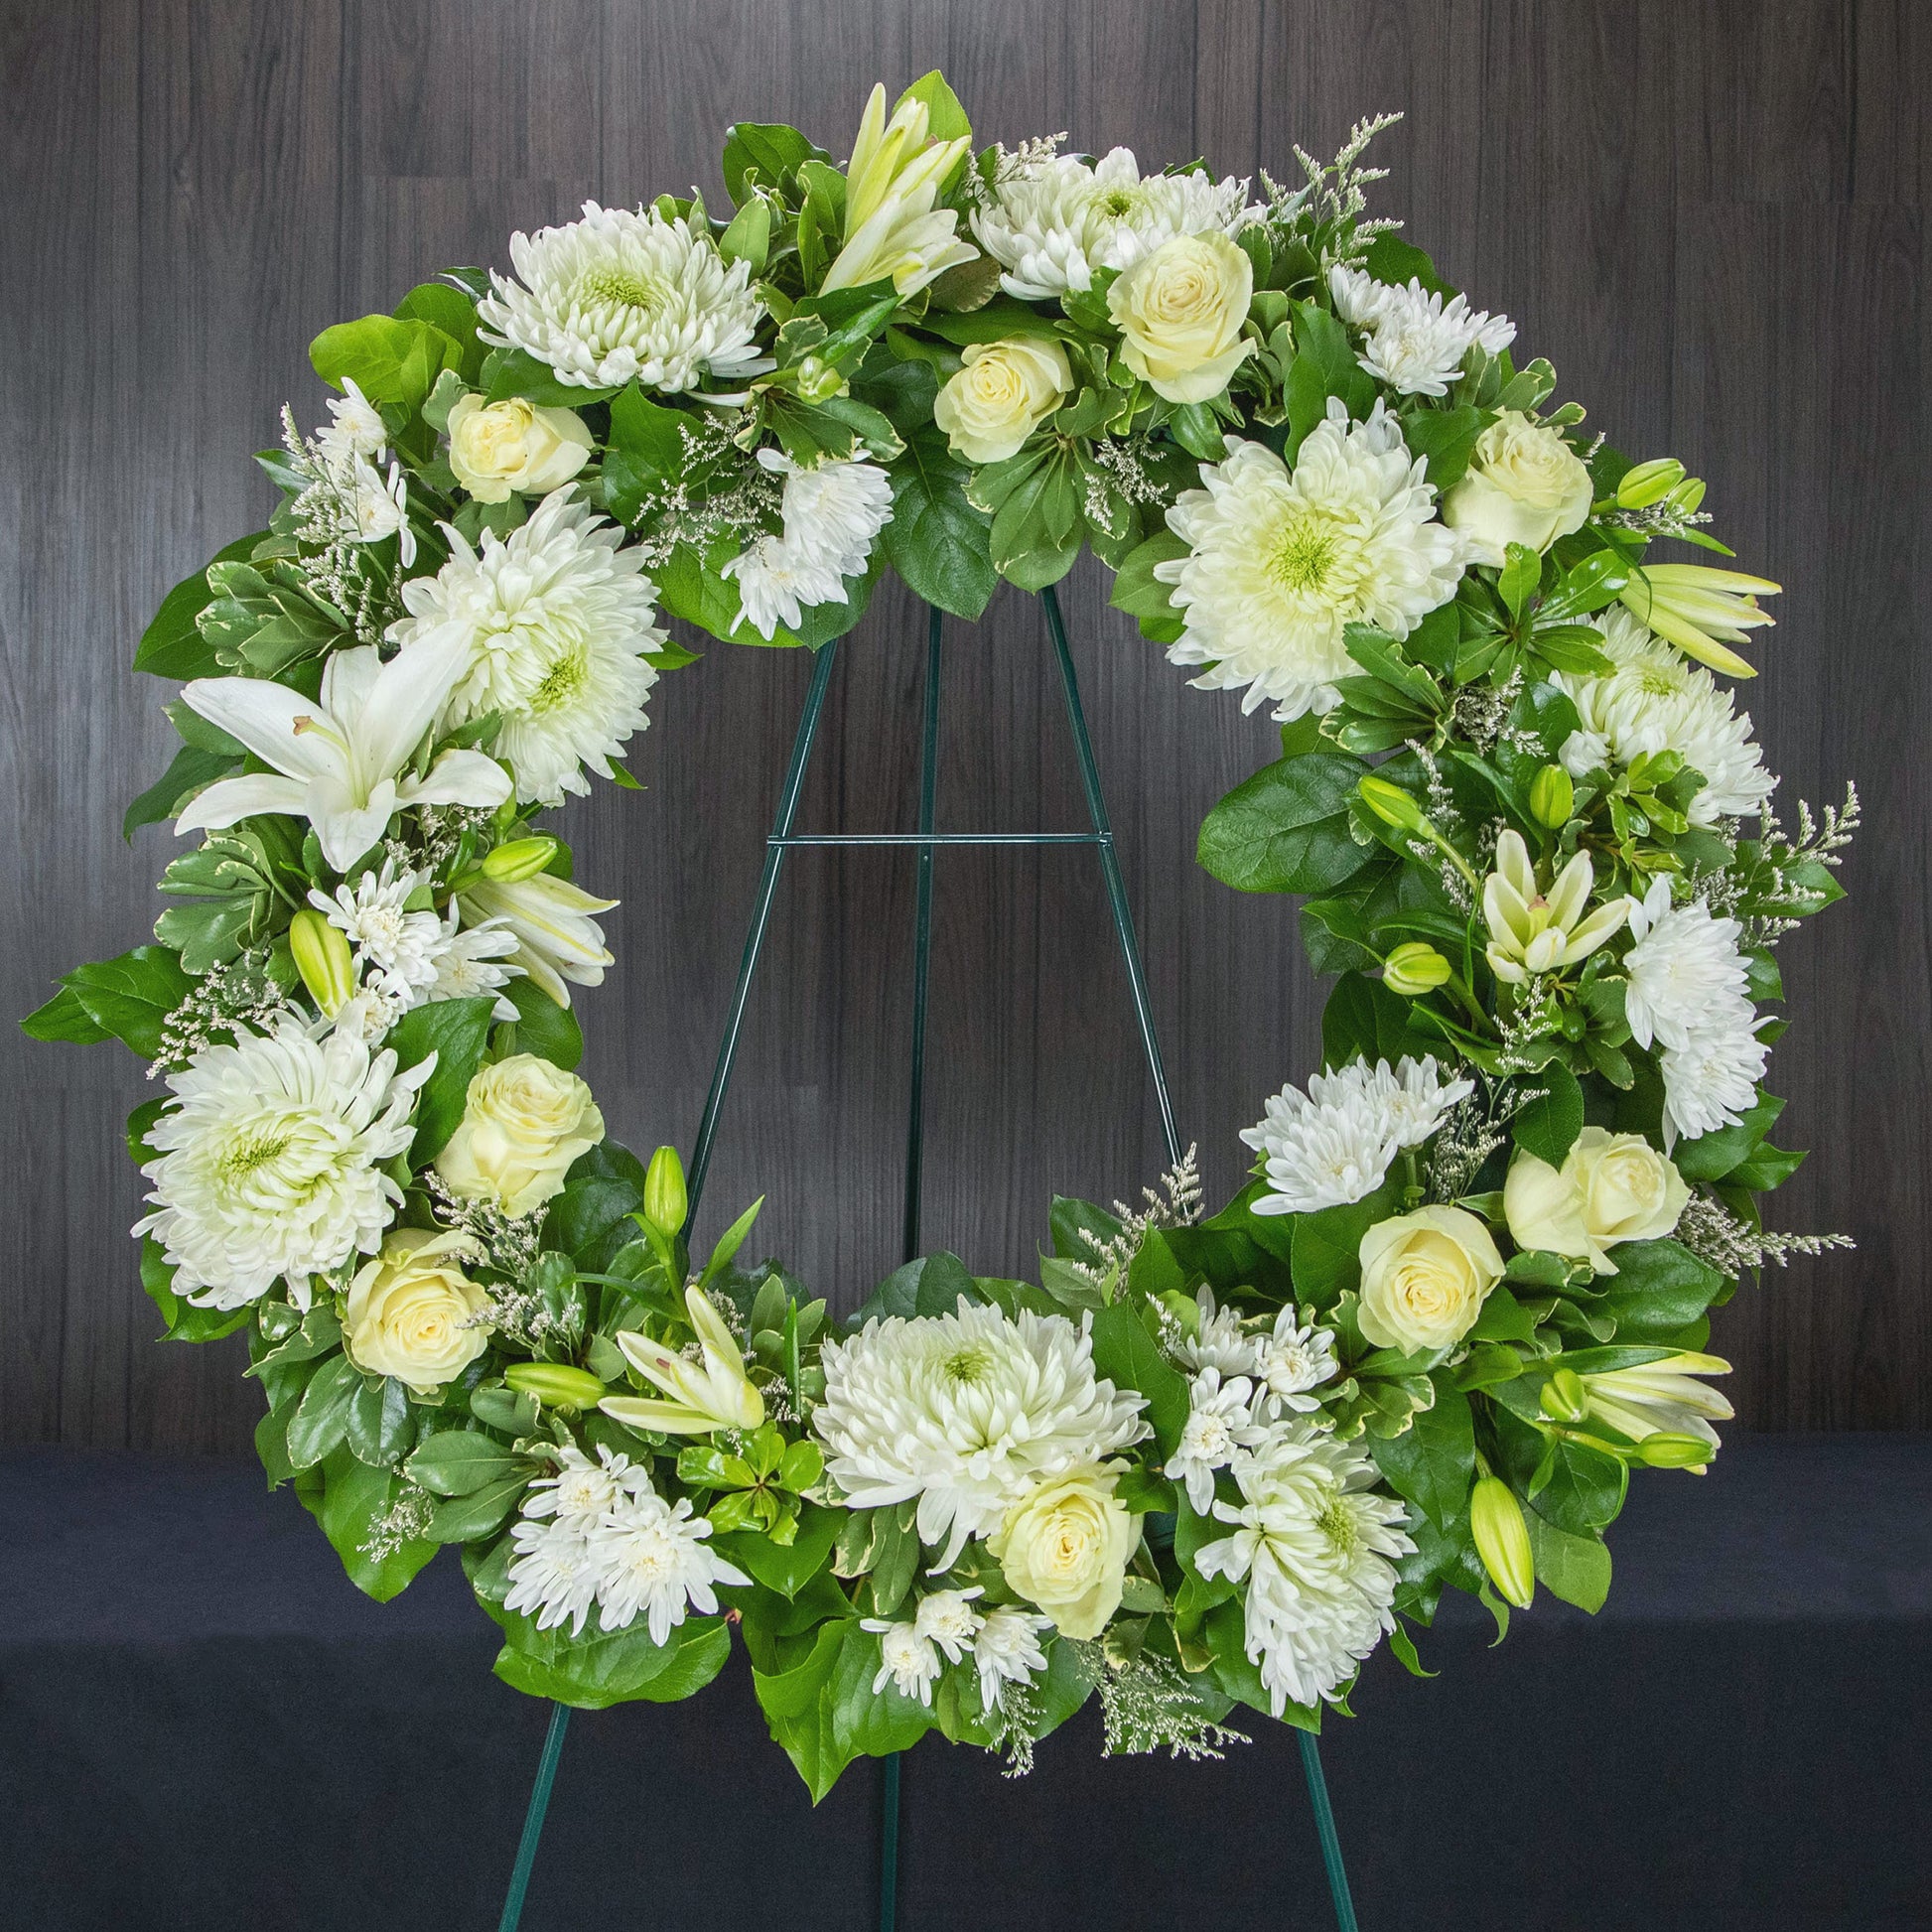 a large wreath made with white flowers and greenery